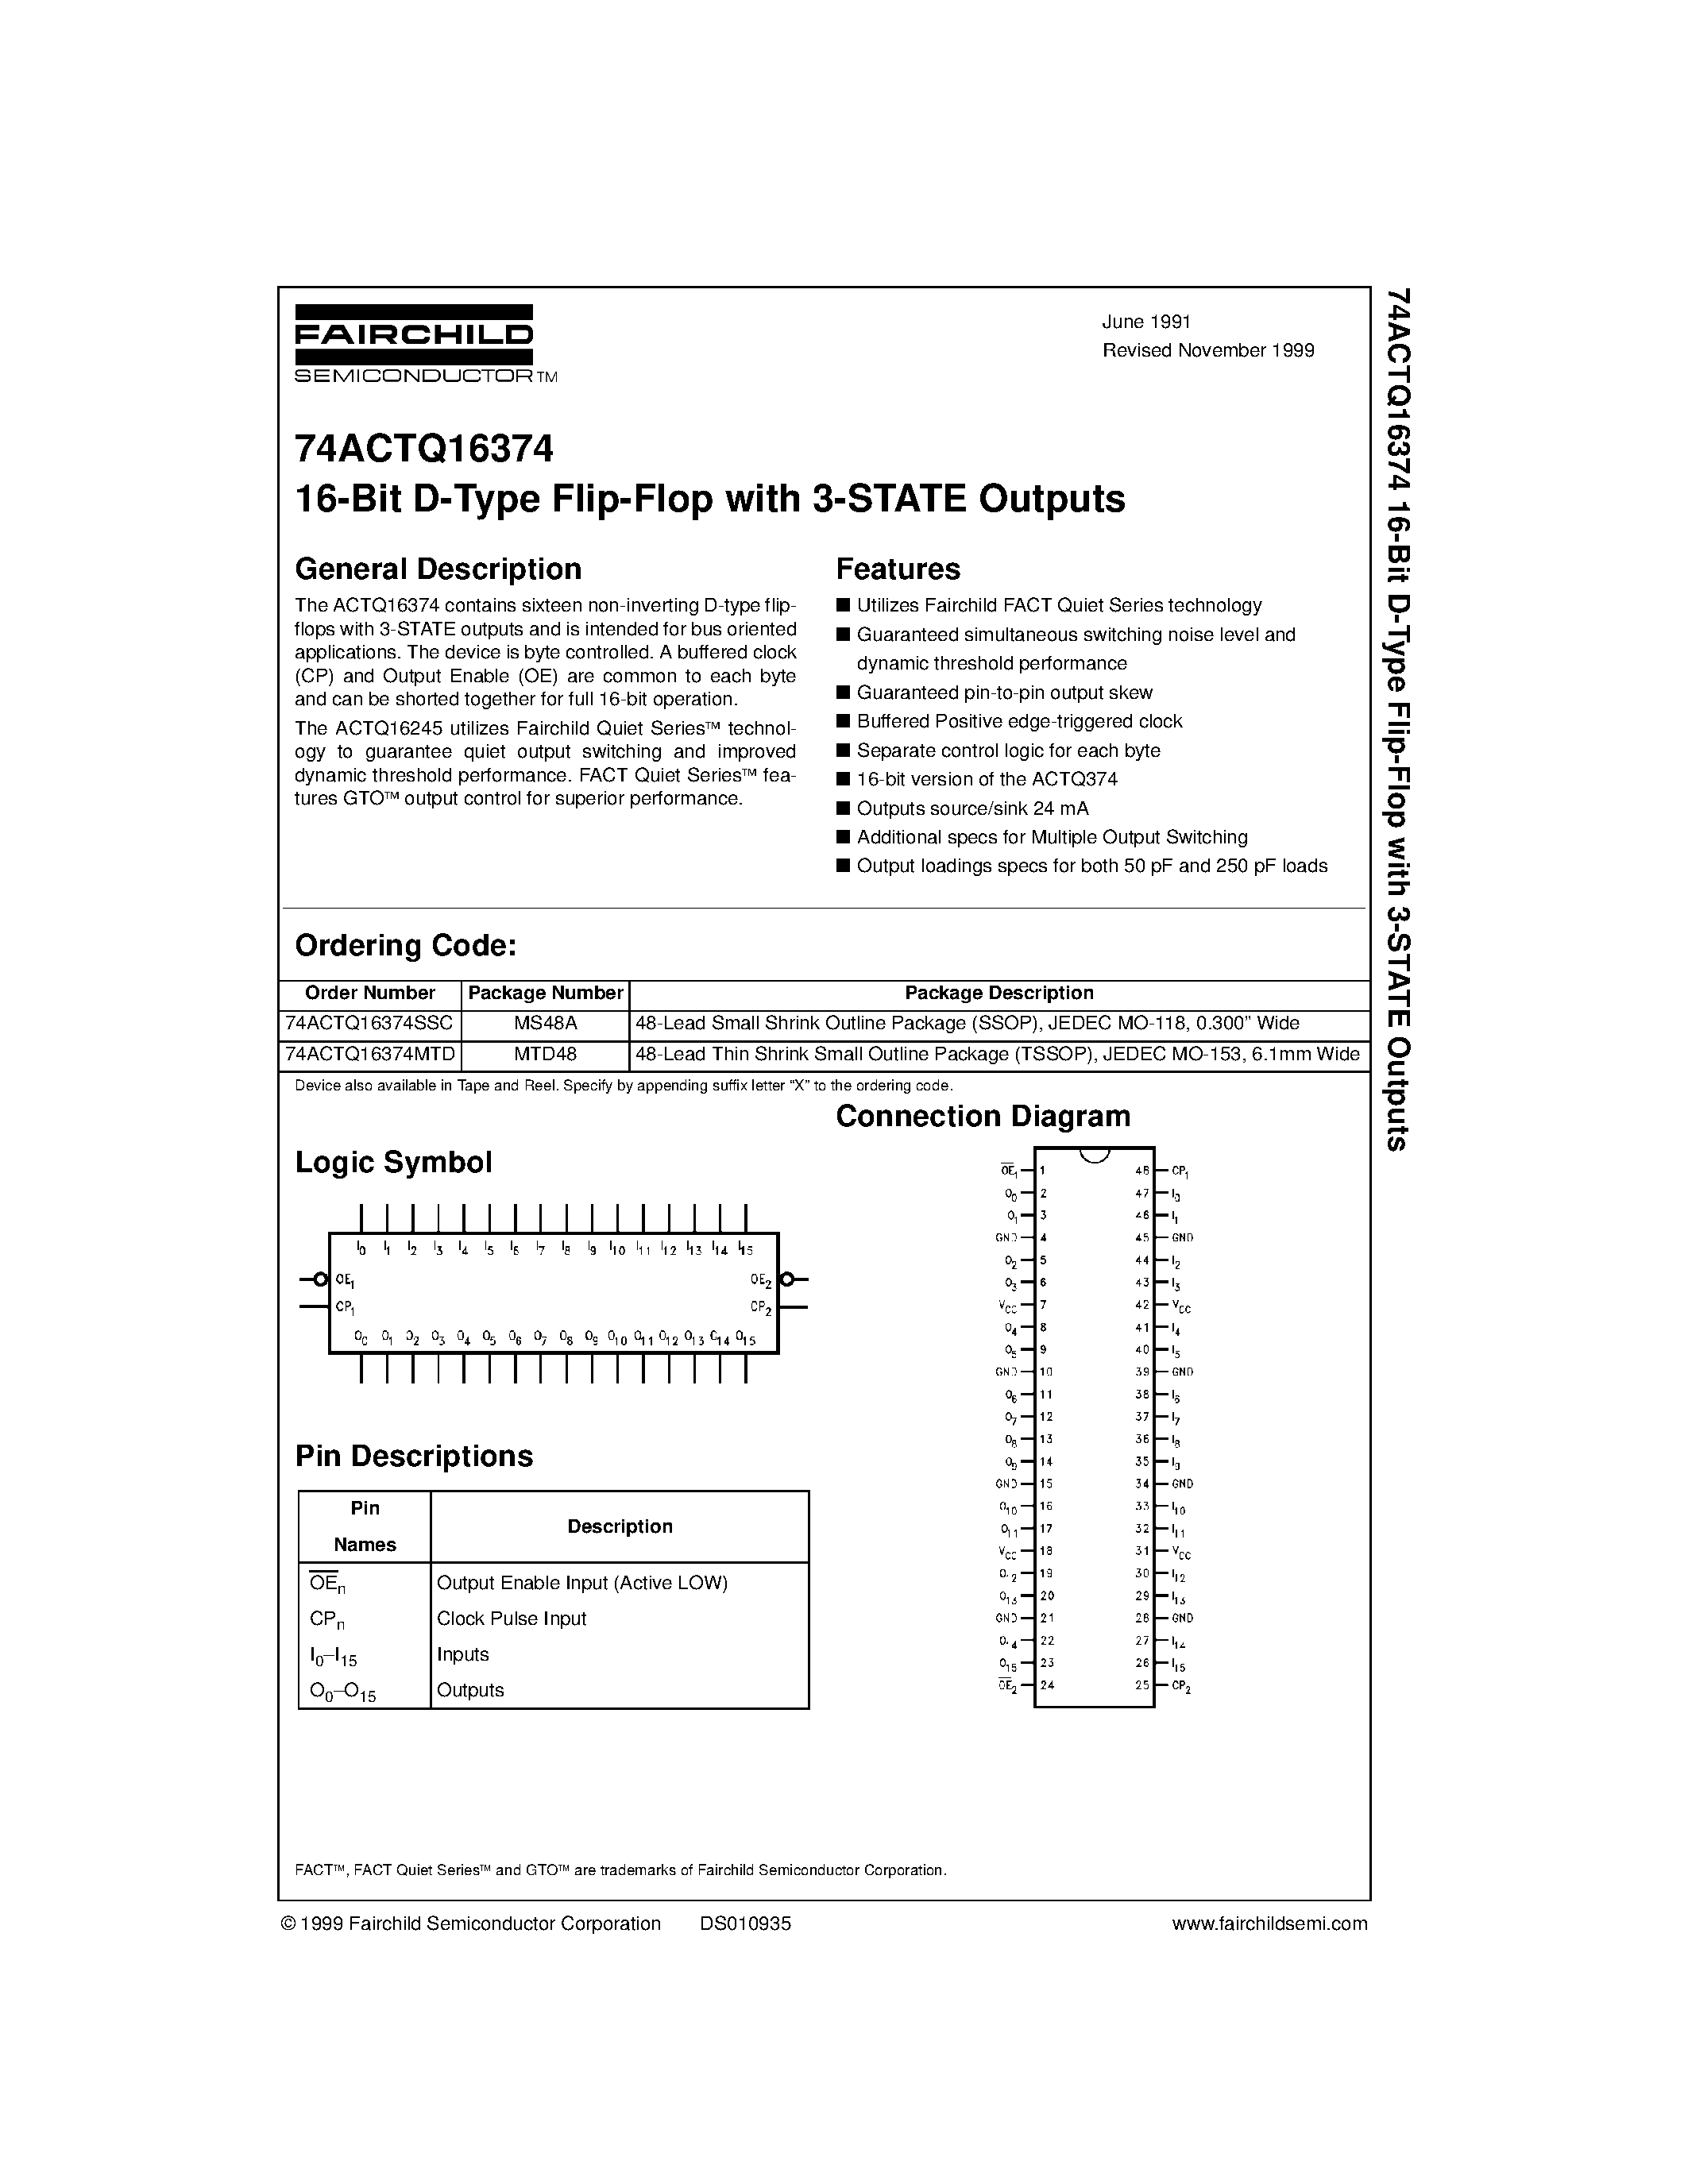 Datasheet 74ACTQ16374MTD - 16-Bit D-Type Flip-Flop with 3-STATE Outputs page 1